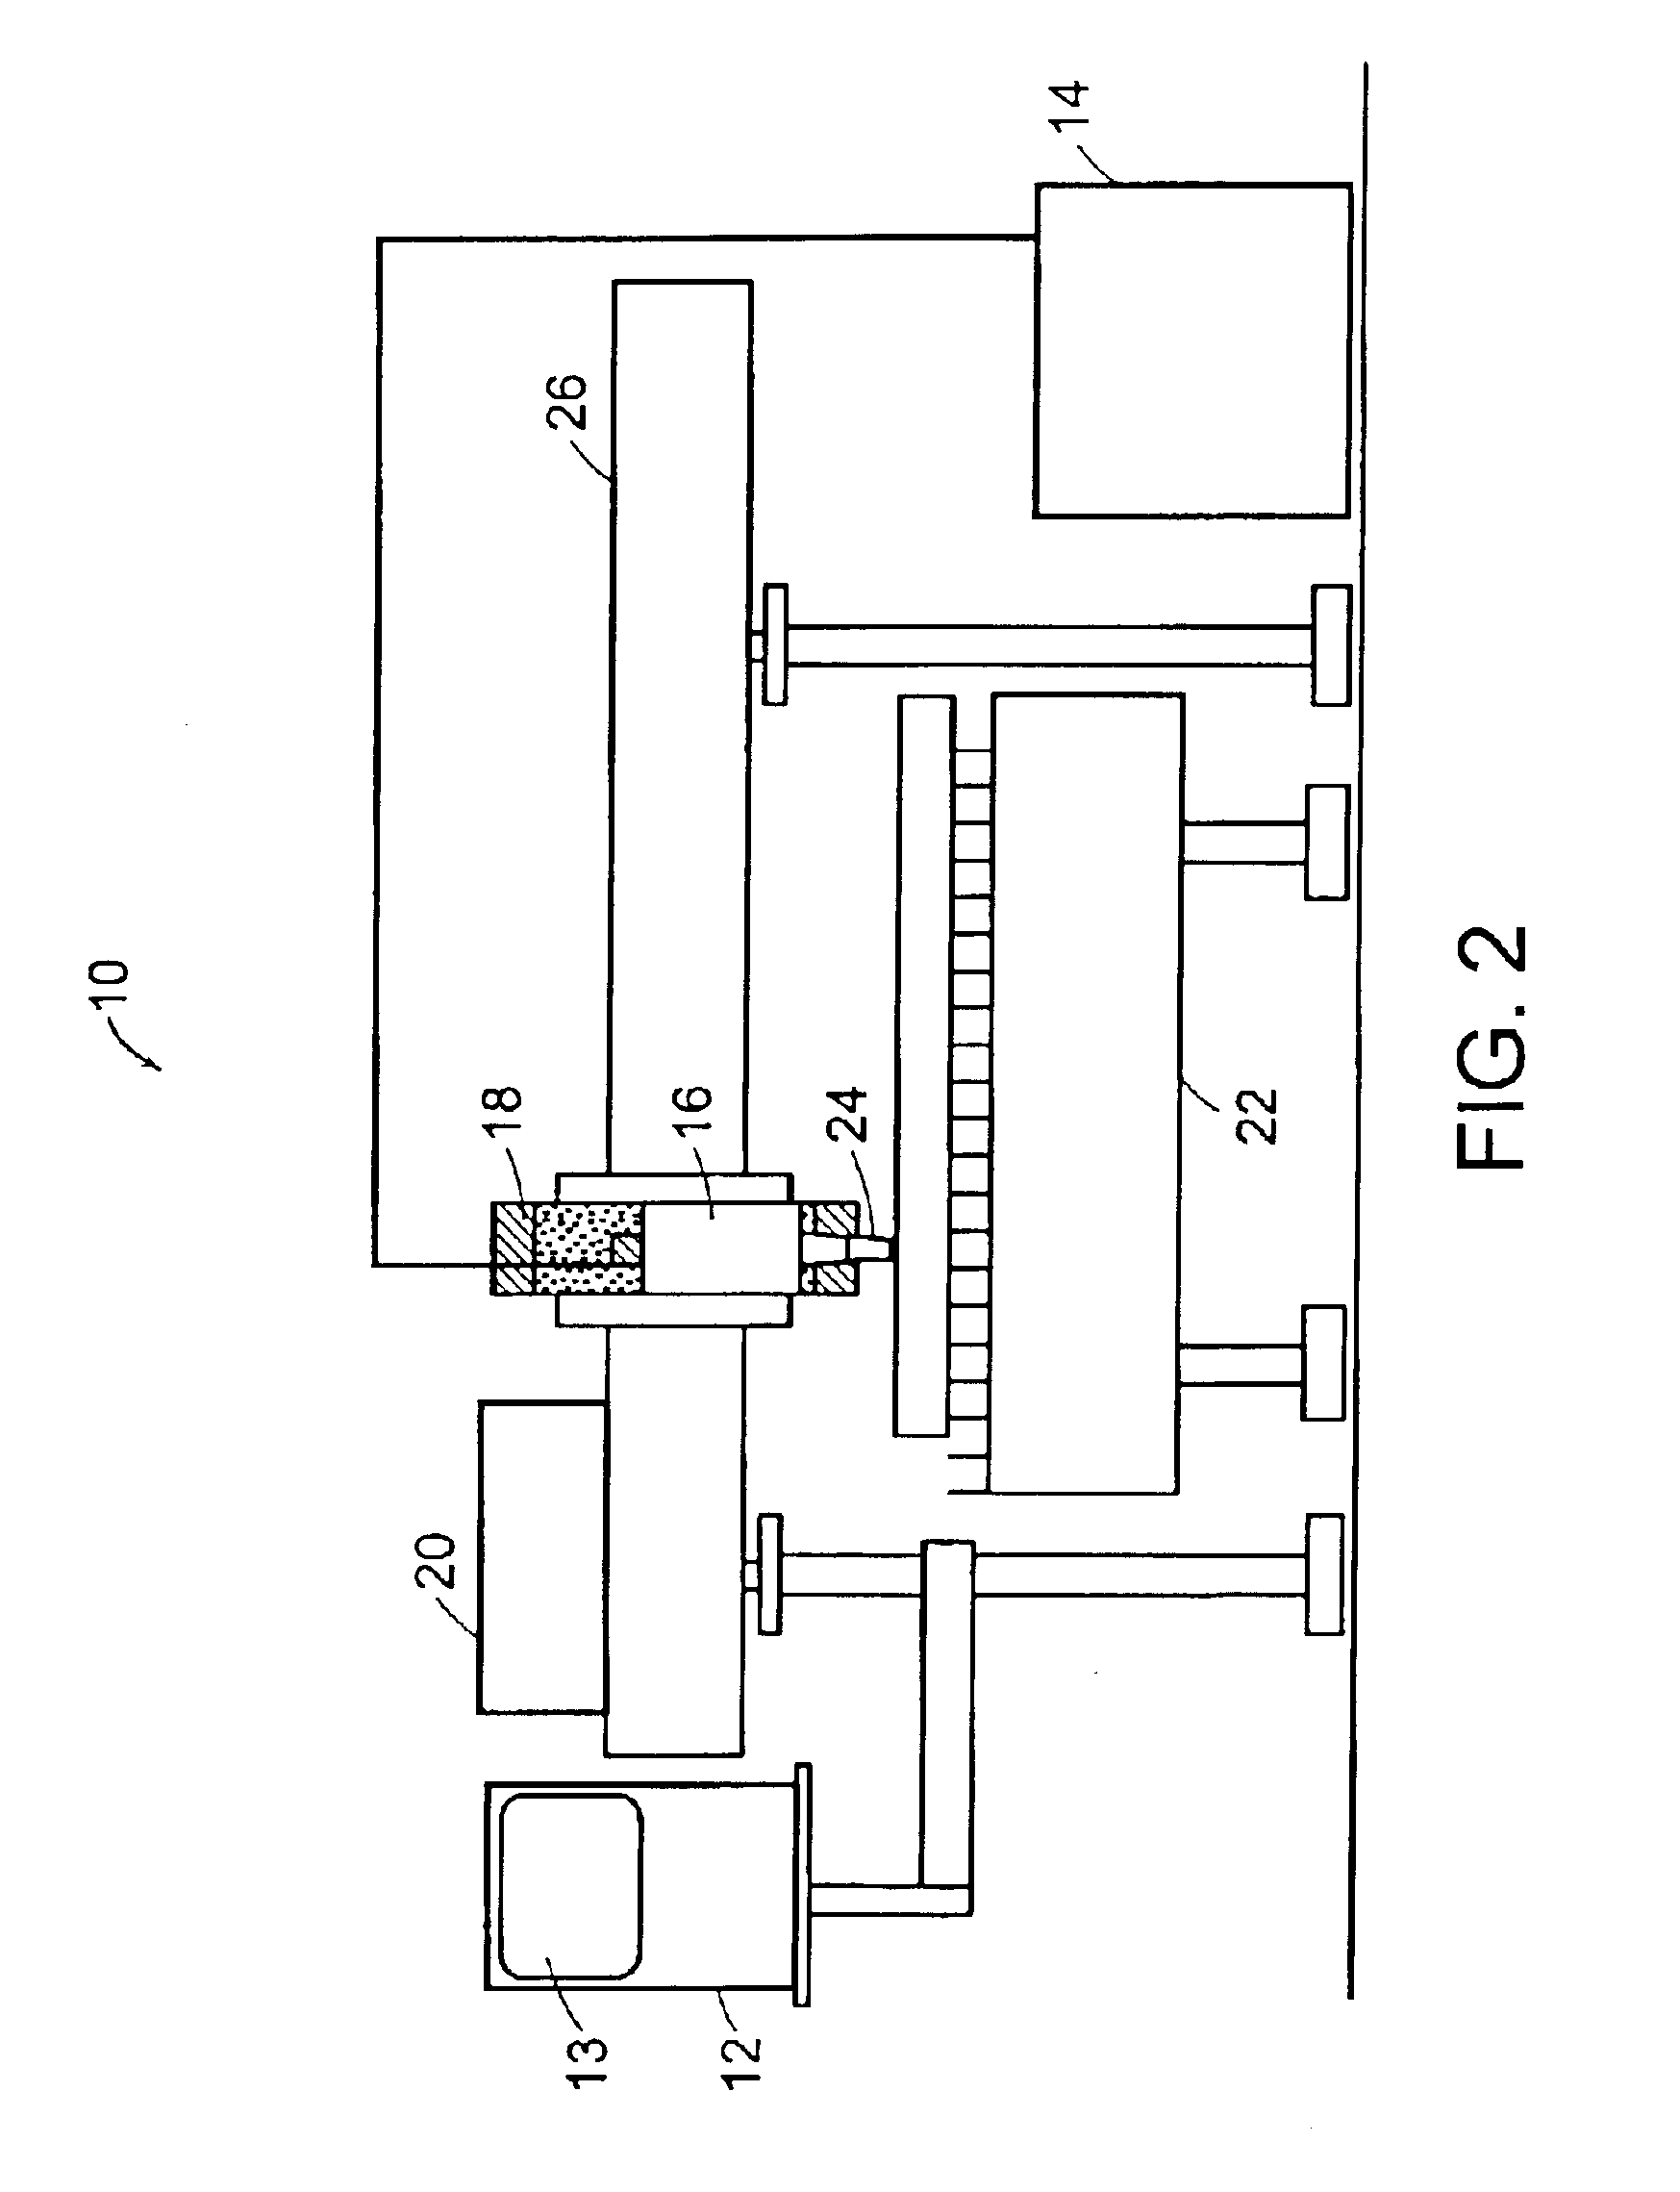 Centralized control architecture for a laser materials processing system